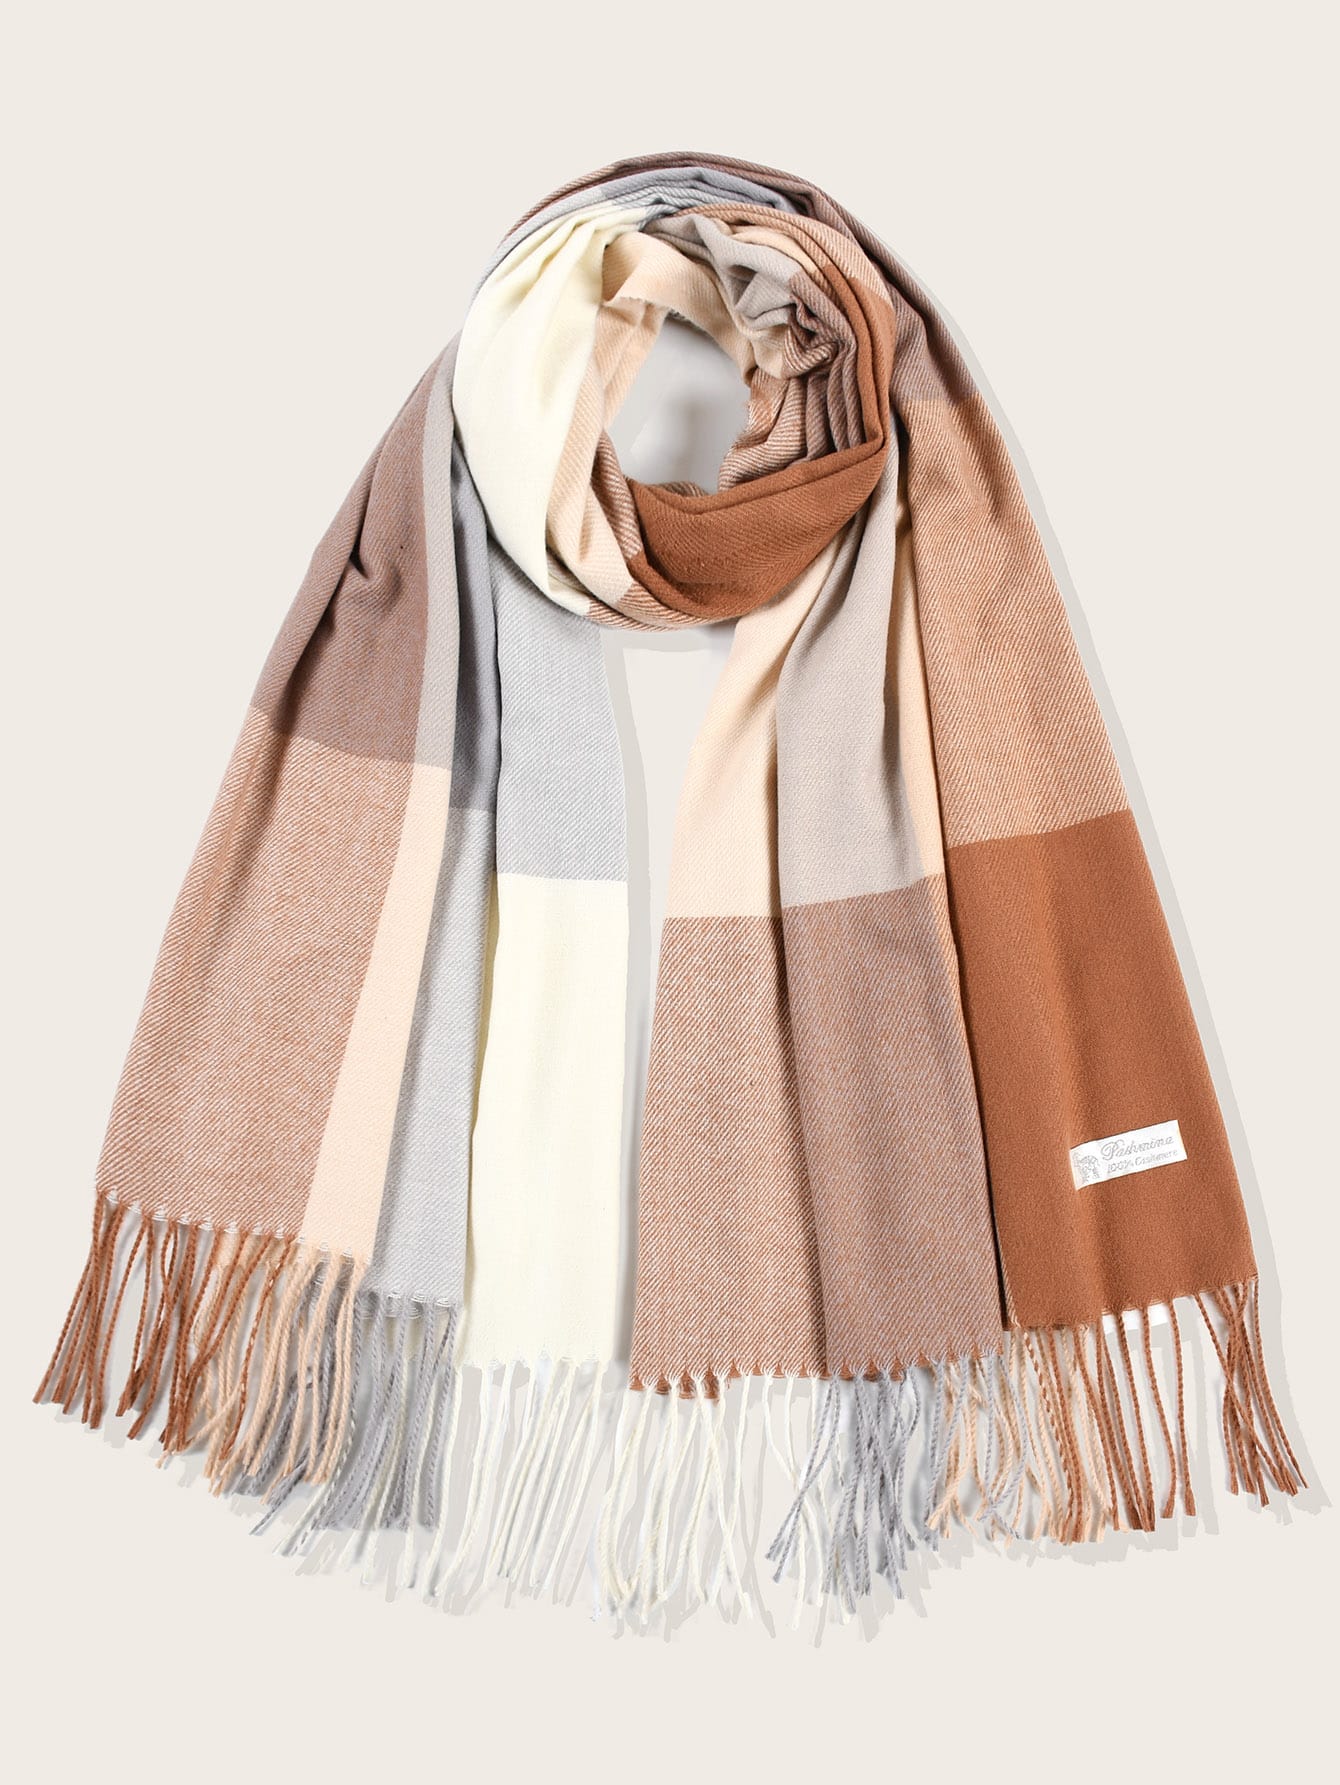 1pc Faux Cashmere Plaid Fringed Scarf For Warmth, Fashionable And Comfortable Shawl Suitable For Travel And Daily Use